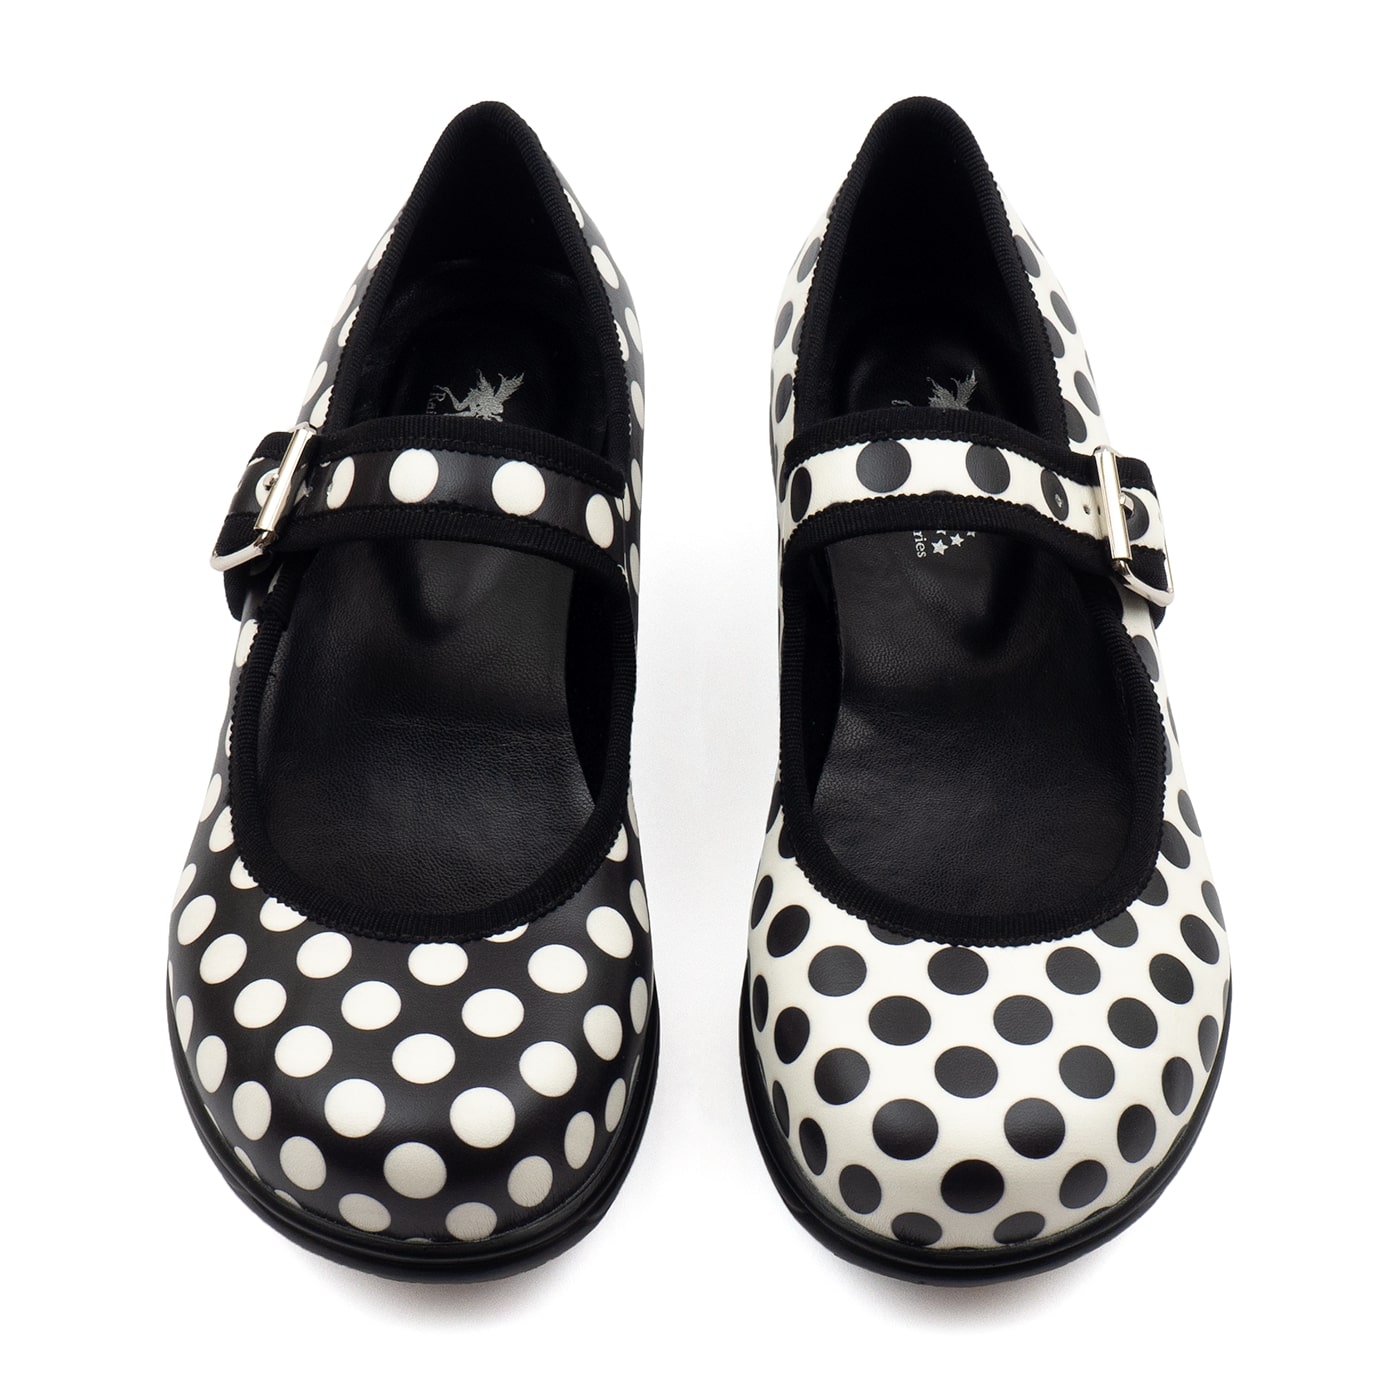 Monochrome Mary Janes by RainbowsAndFairies.com (Black & White - Polka Dots - Stripes - Mismatched Shoes - Shoes - Pair & A Spare) - SKU: FW_MARYJ_MONOC_ORG - Pic 04